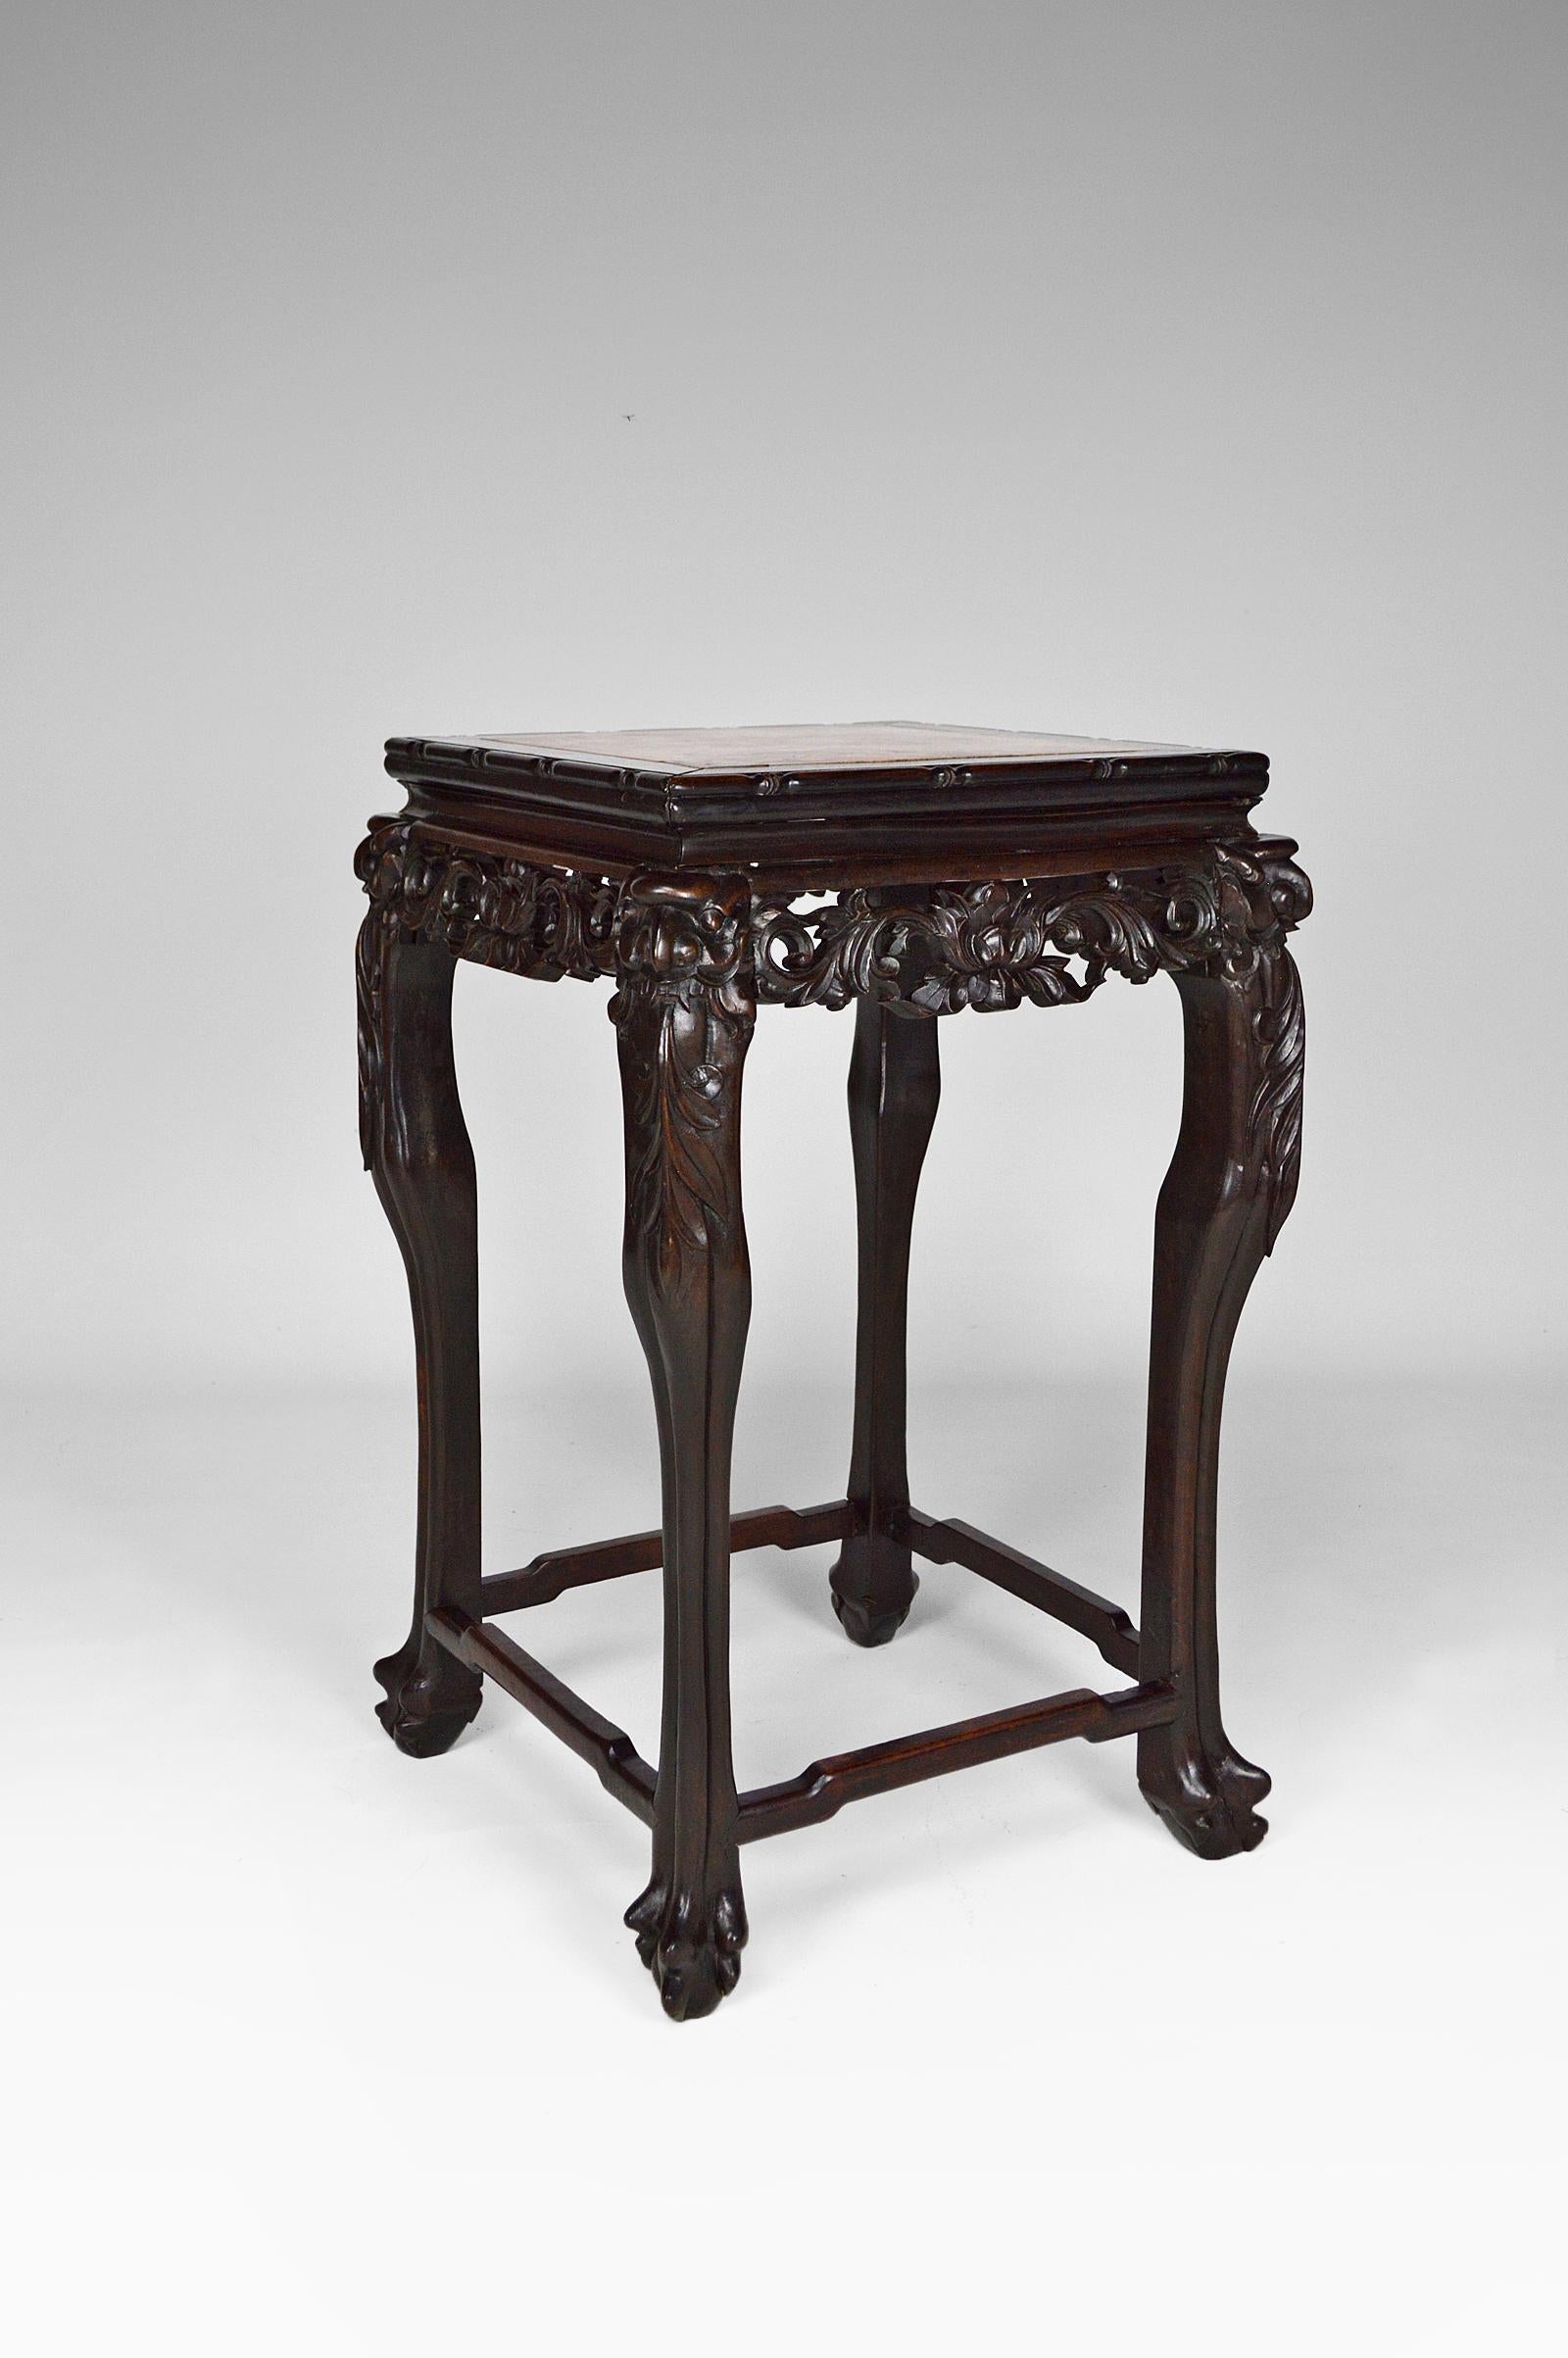 Asian Carved Pedestal Table with Marble Top, Dragons and Flowers, circa 1890 For Sale 2